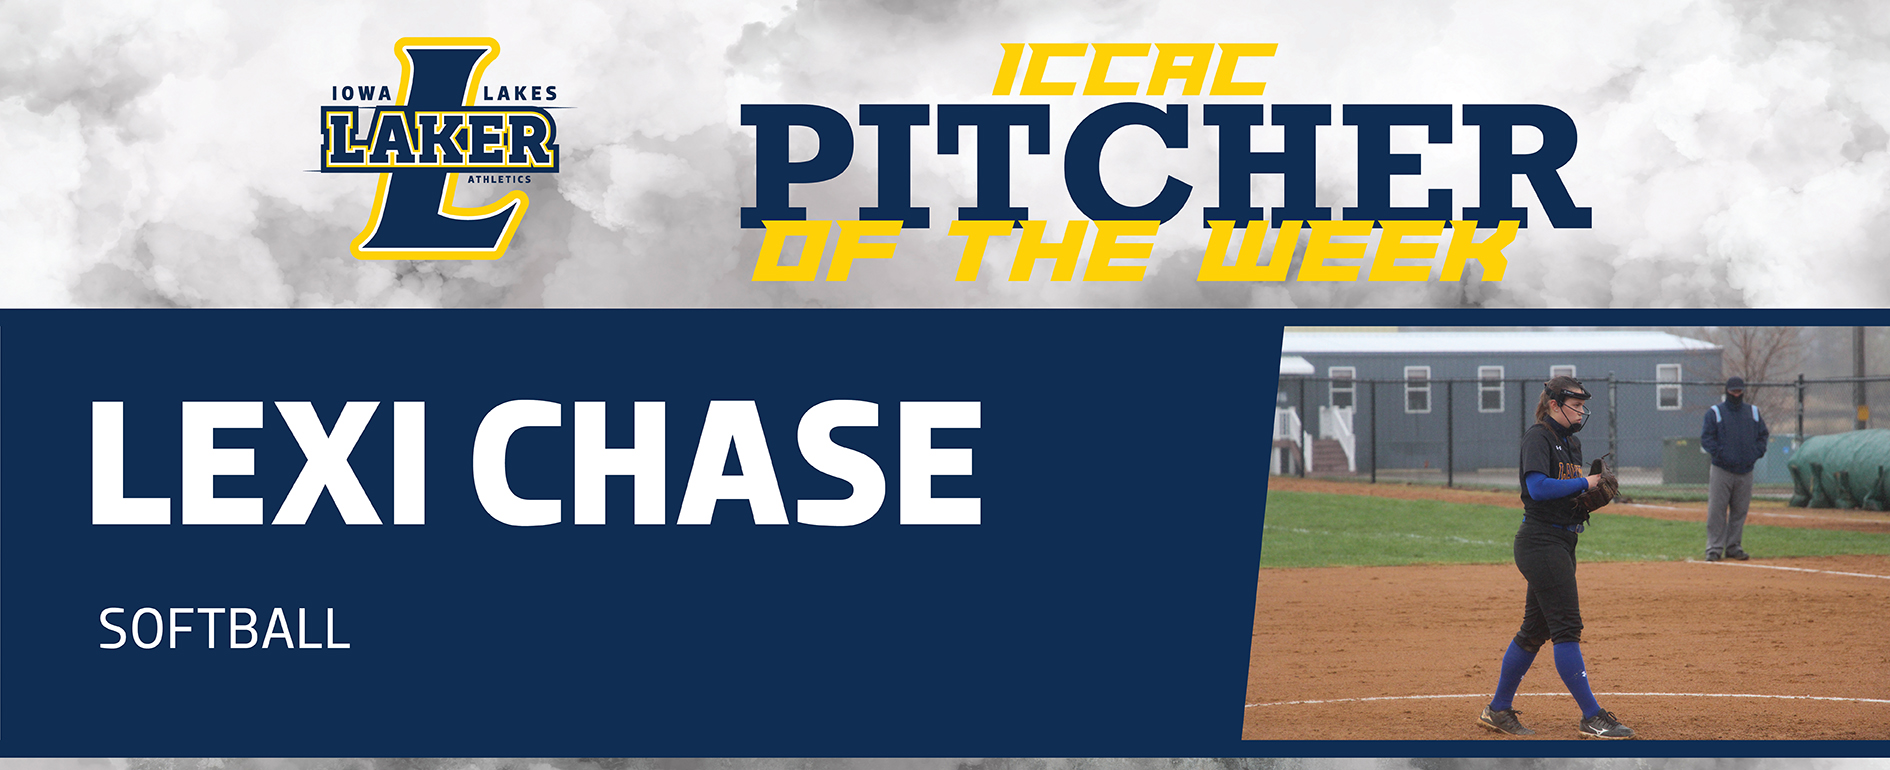 Lexi Chase Named Player of the Week